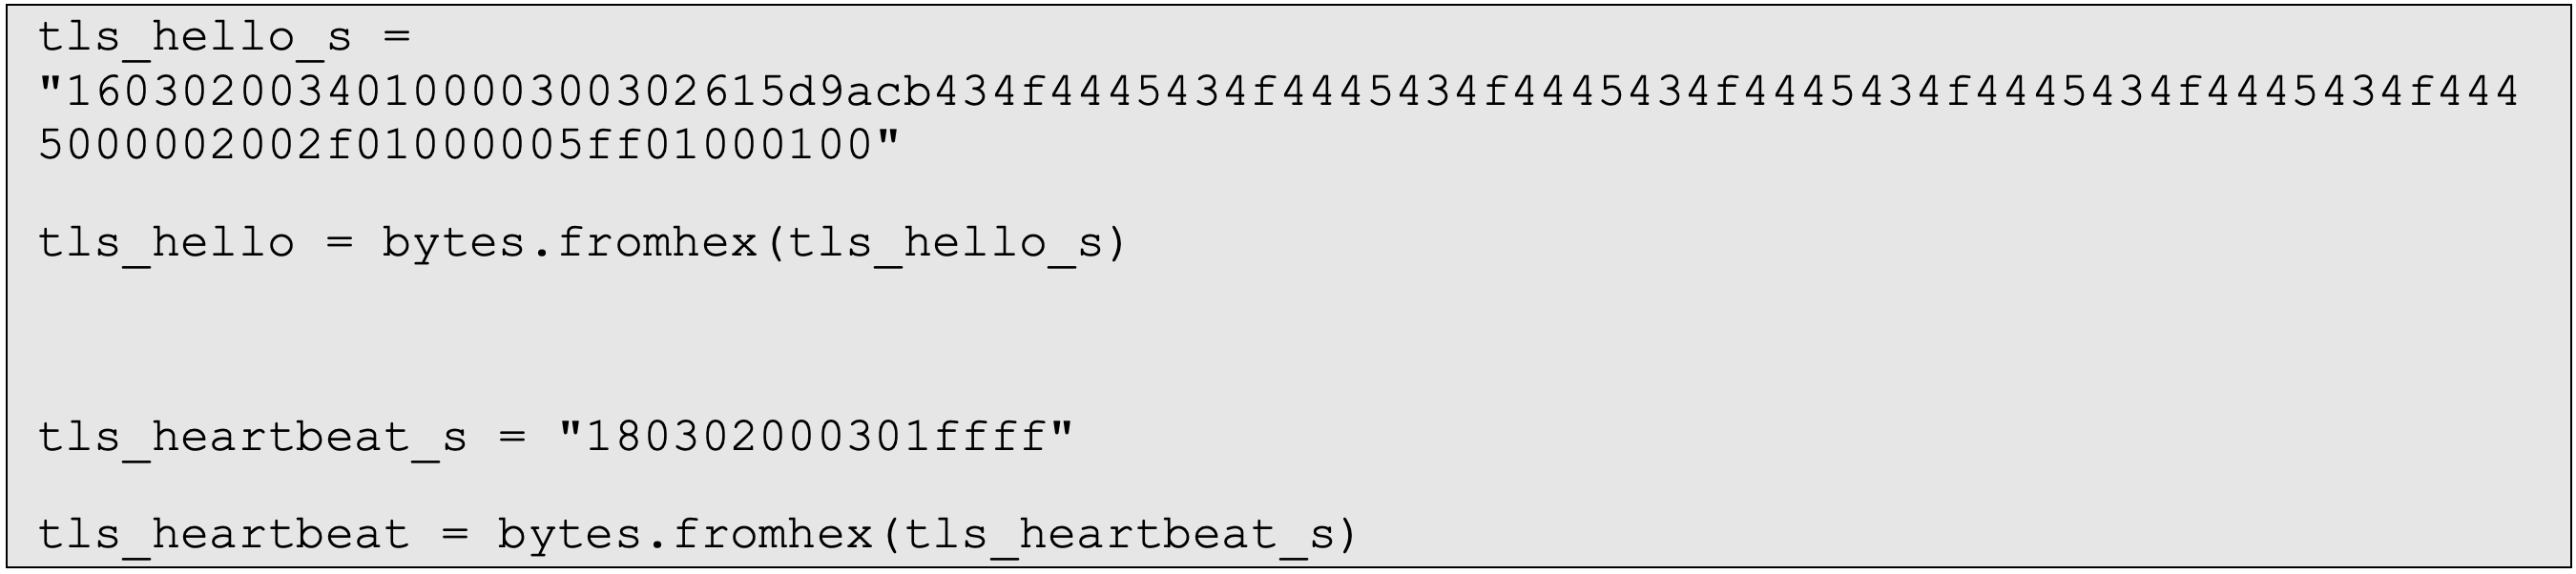 ClientHello and heartbeat request messages | Synopsys